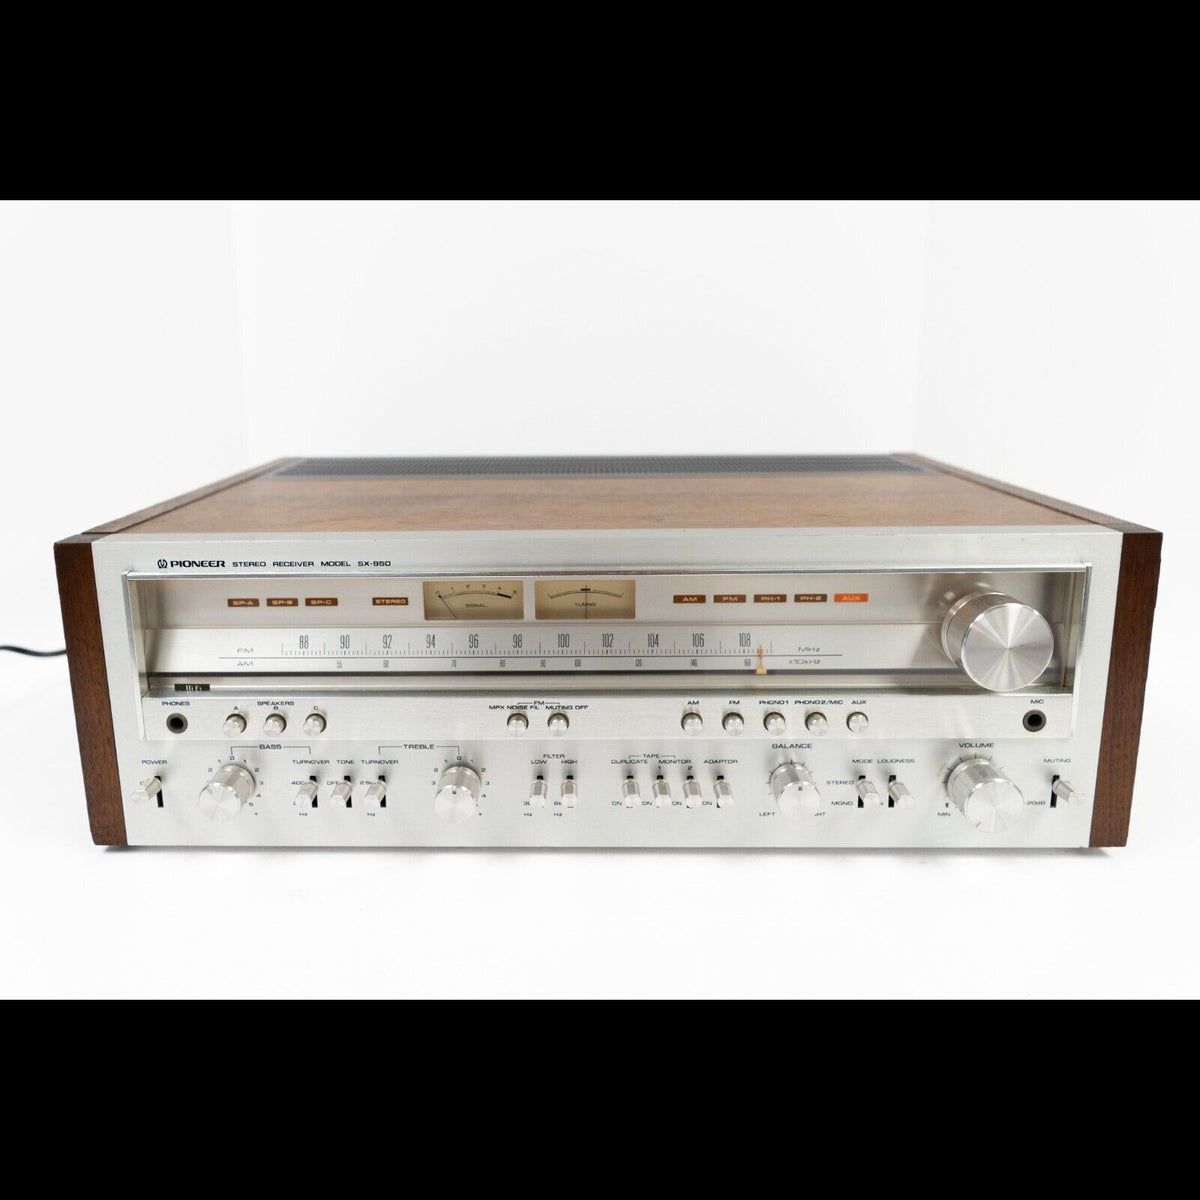 PIONEER SX-950 Stereo Receiver - Fully Refurbished in Excellent Condition